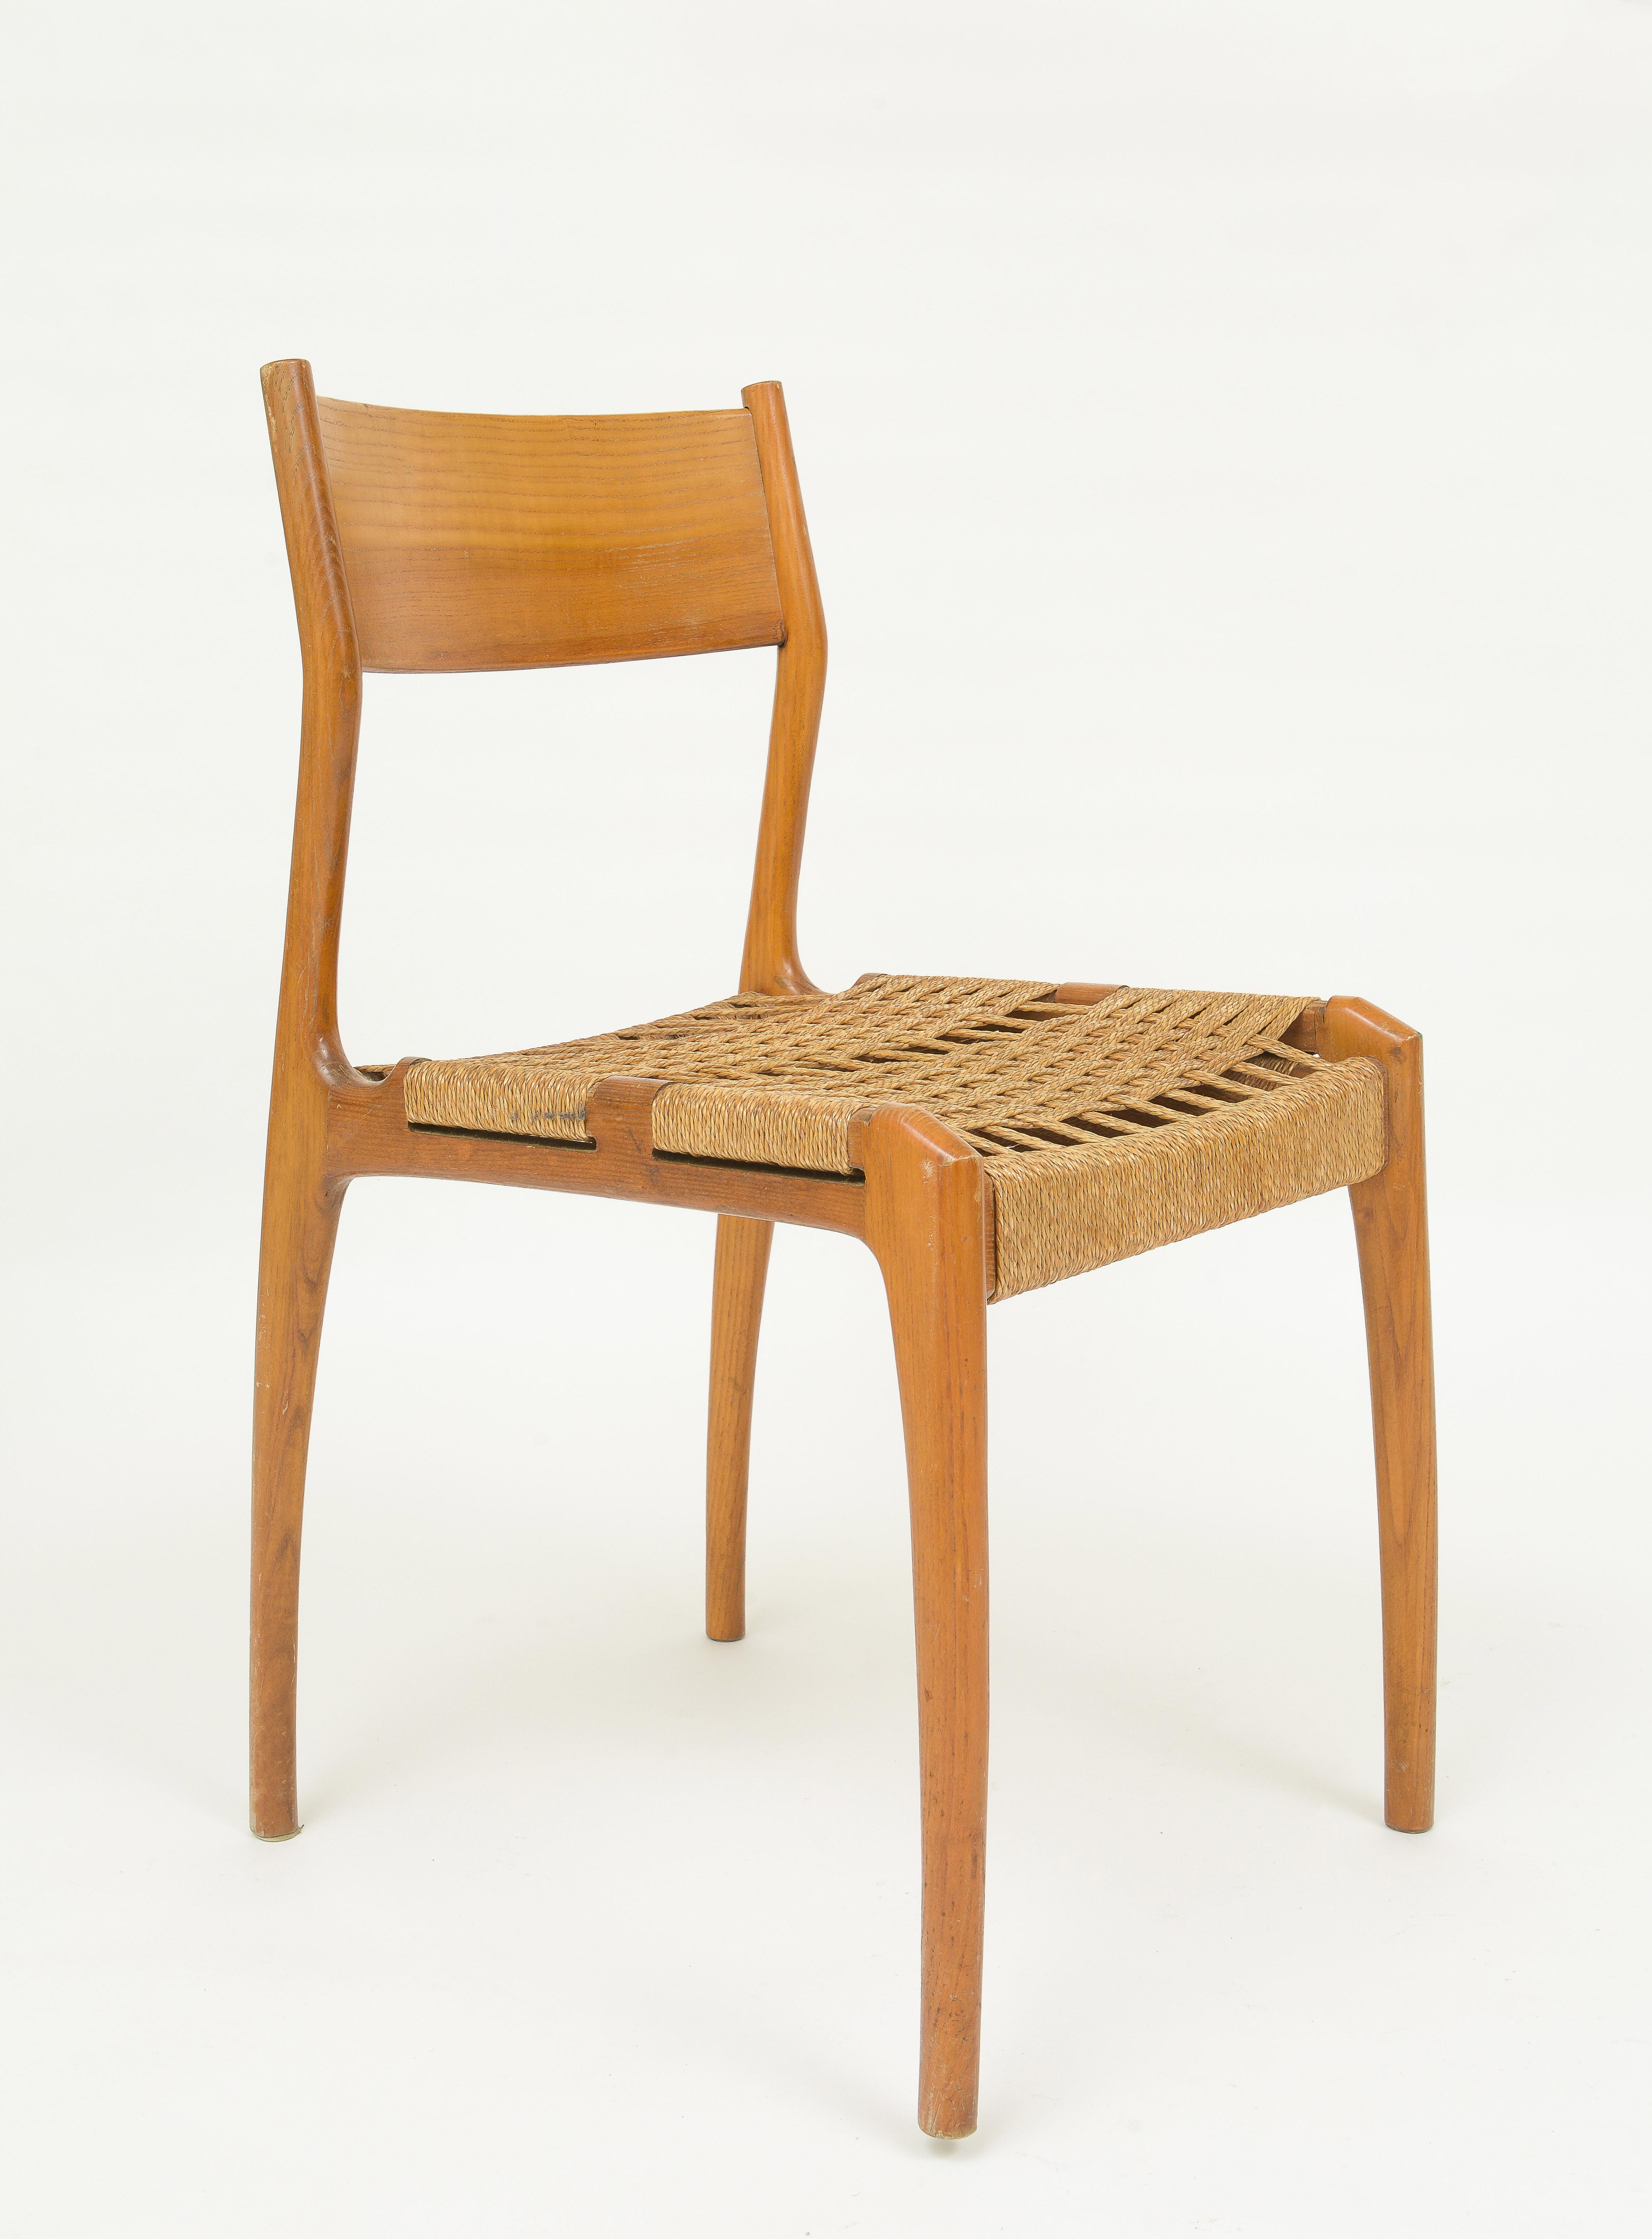 6 Italian Dining Chairs with Woven Rush Seating, 1960's France For Sale 1